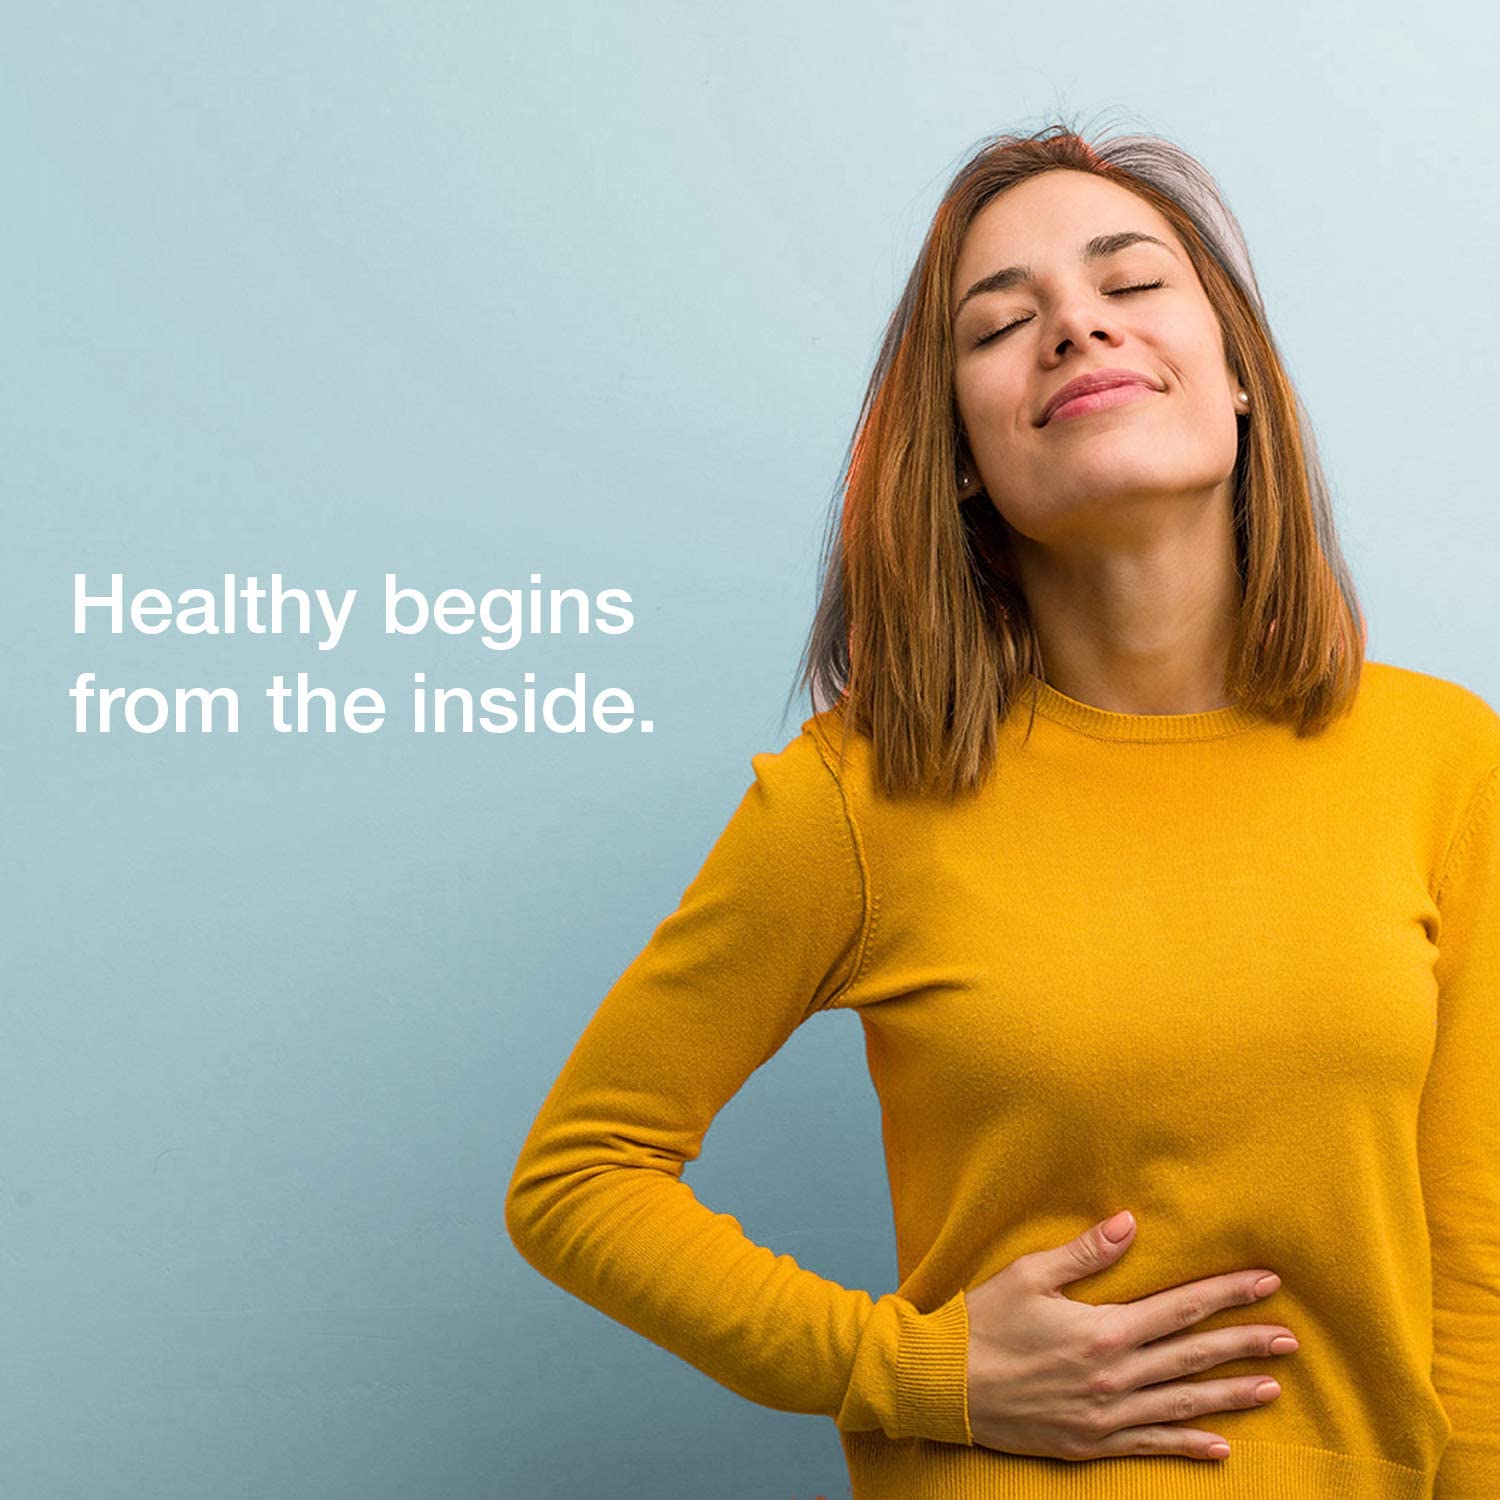 Healthy begins from the inside